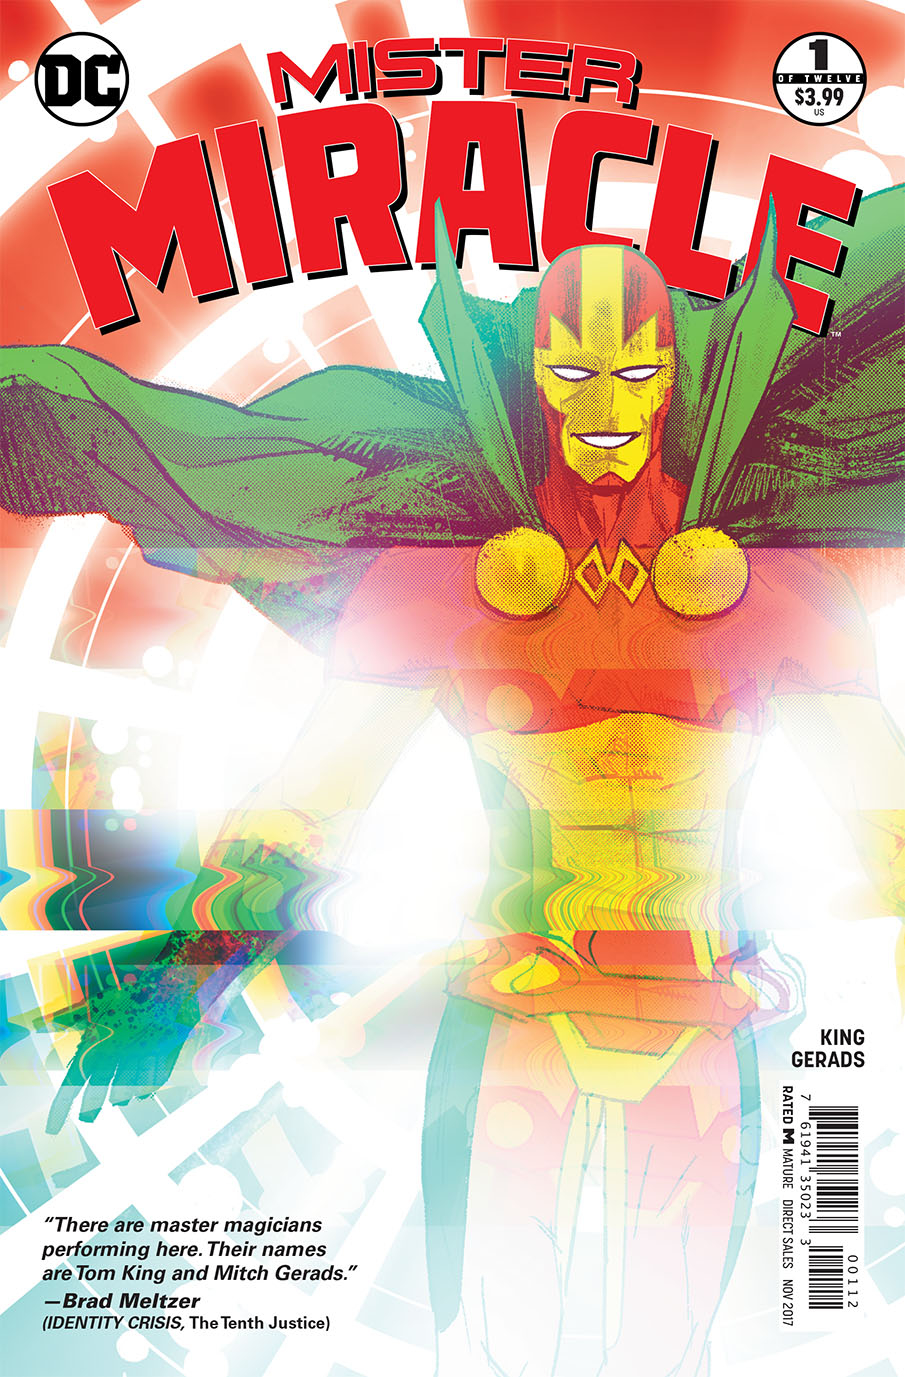 MISTER MIRACLE #1 (OF 12) 2ND PTG (MR)